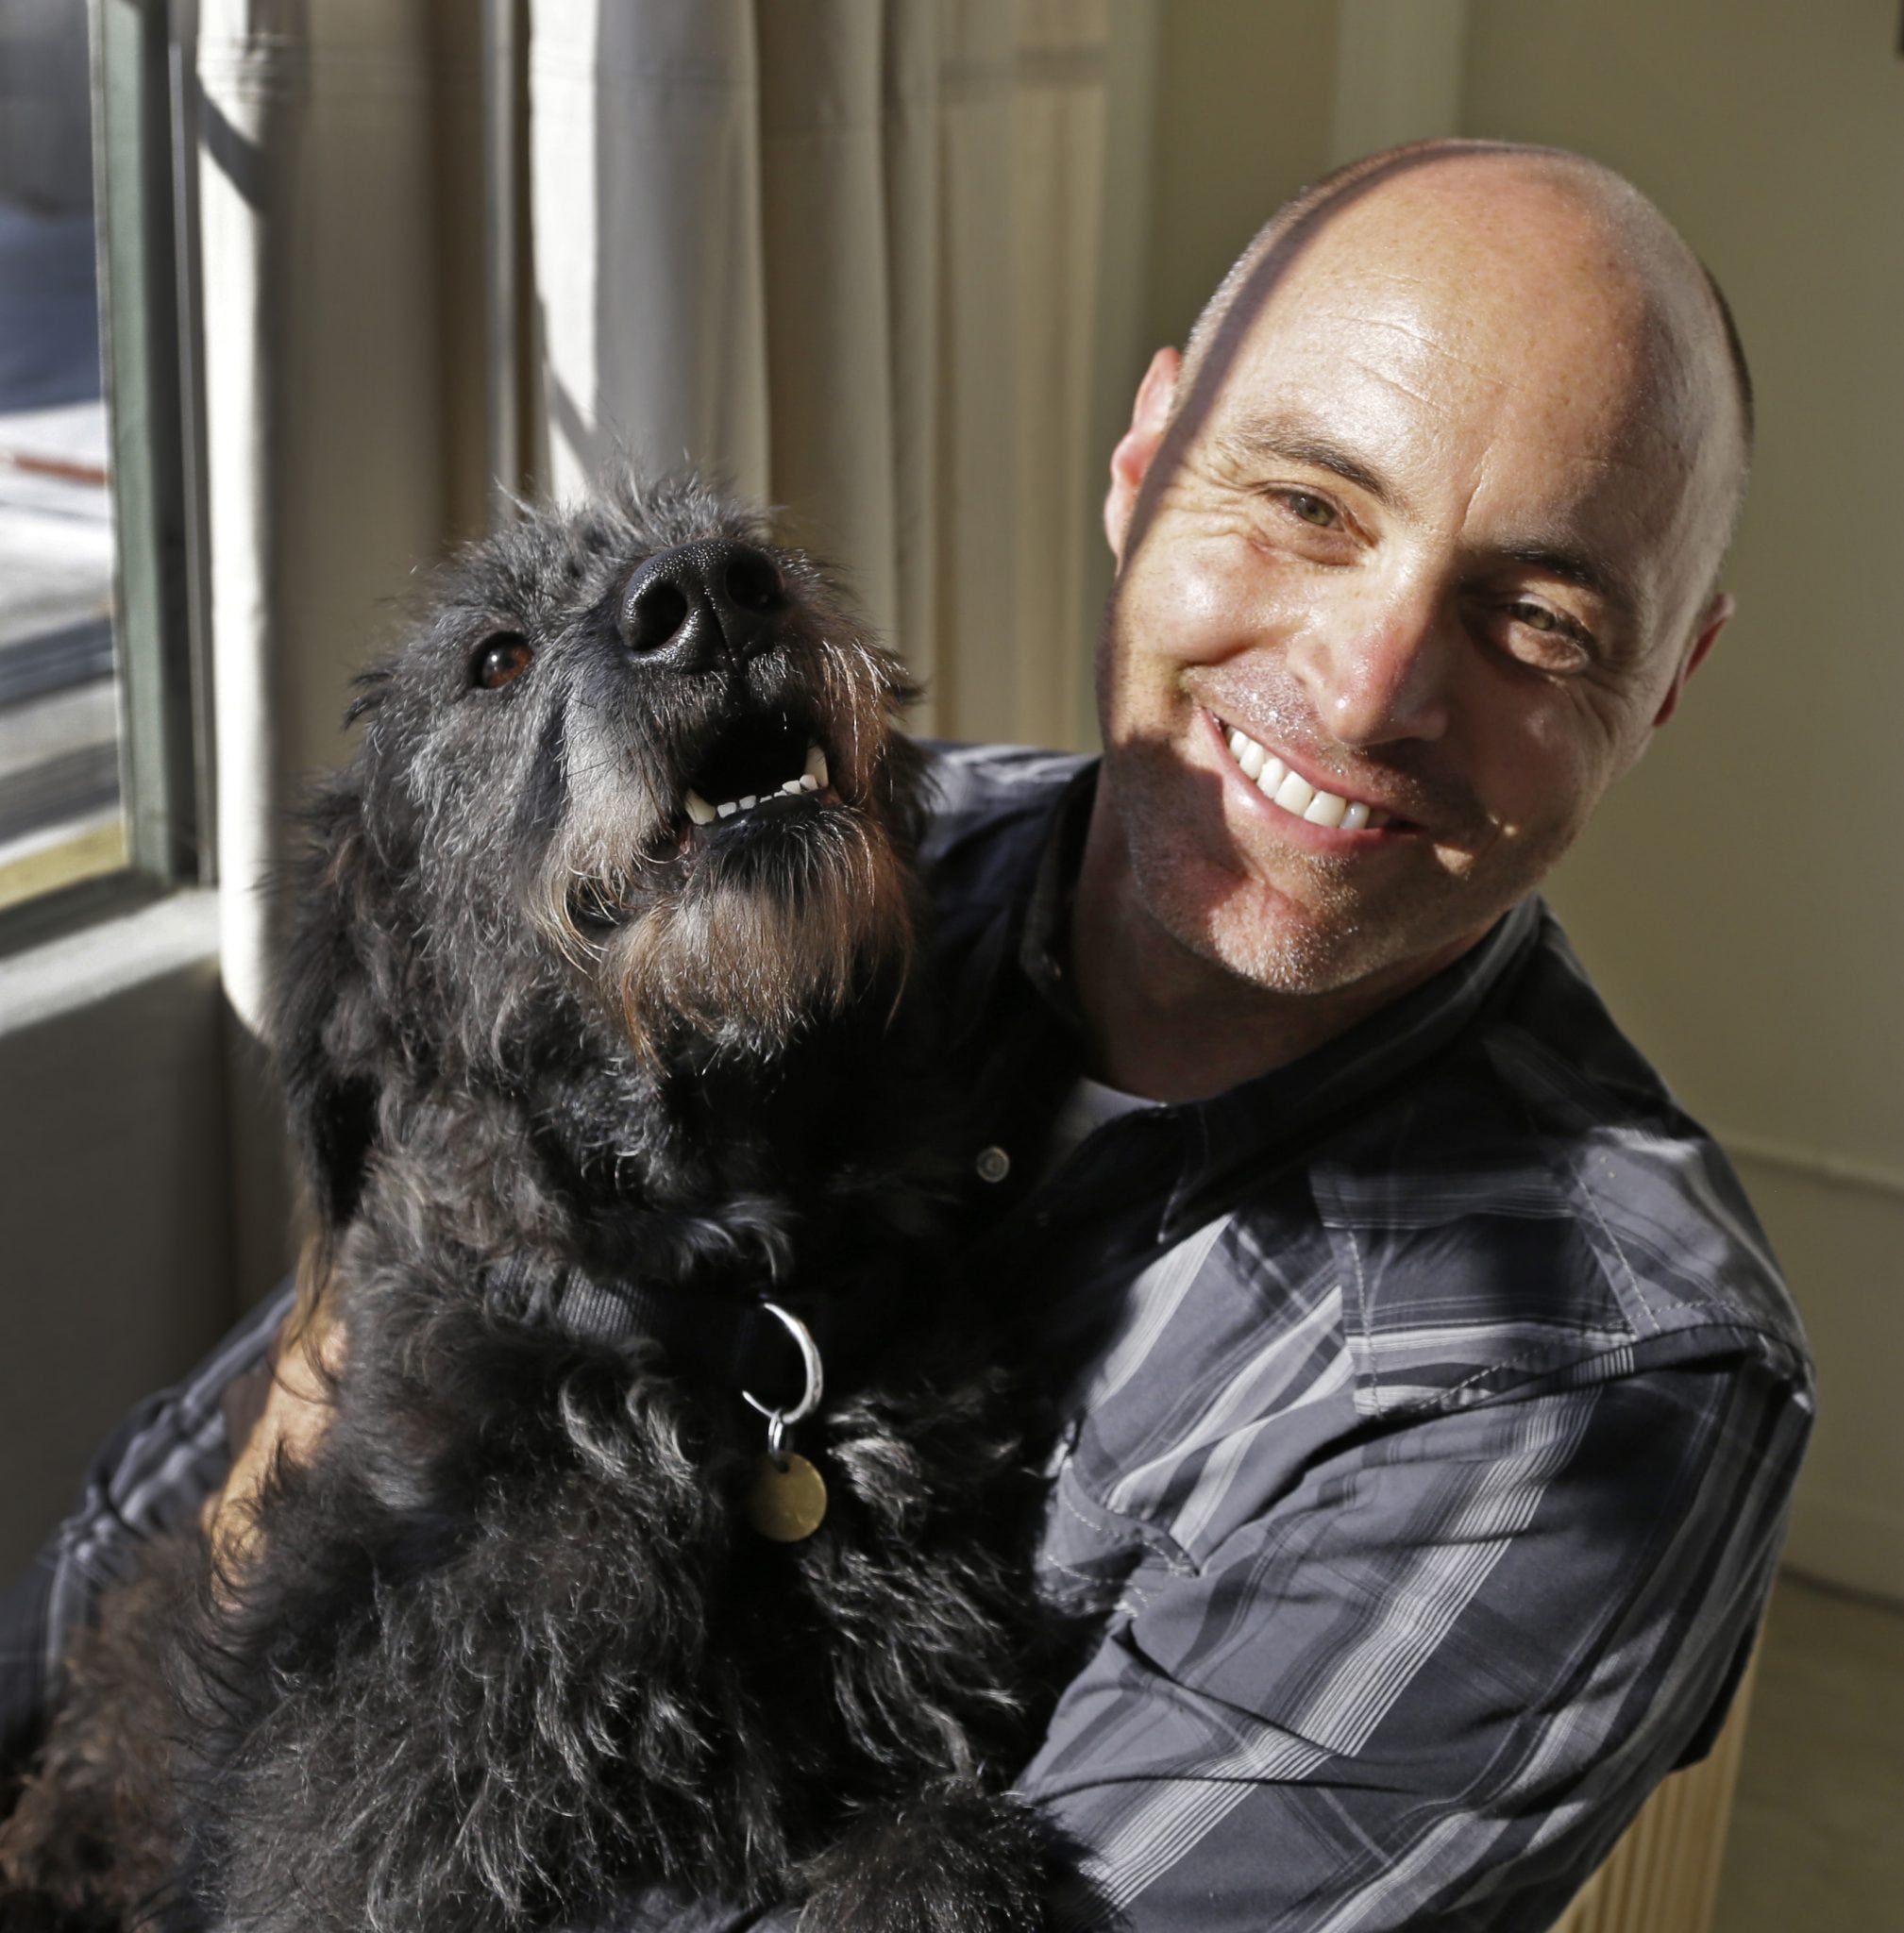 Martin Sprouse with 'Grady,' an Airedale Terrier-Irish Wolfhound mix, Thursday, April 18, 2013, in Oakland, Calif. 